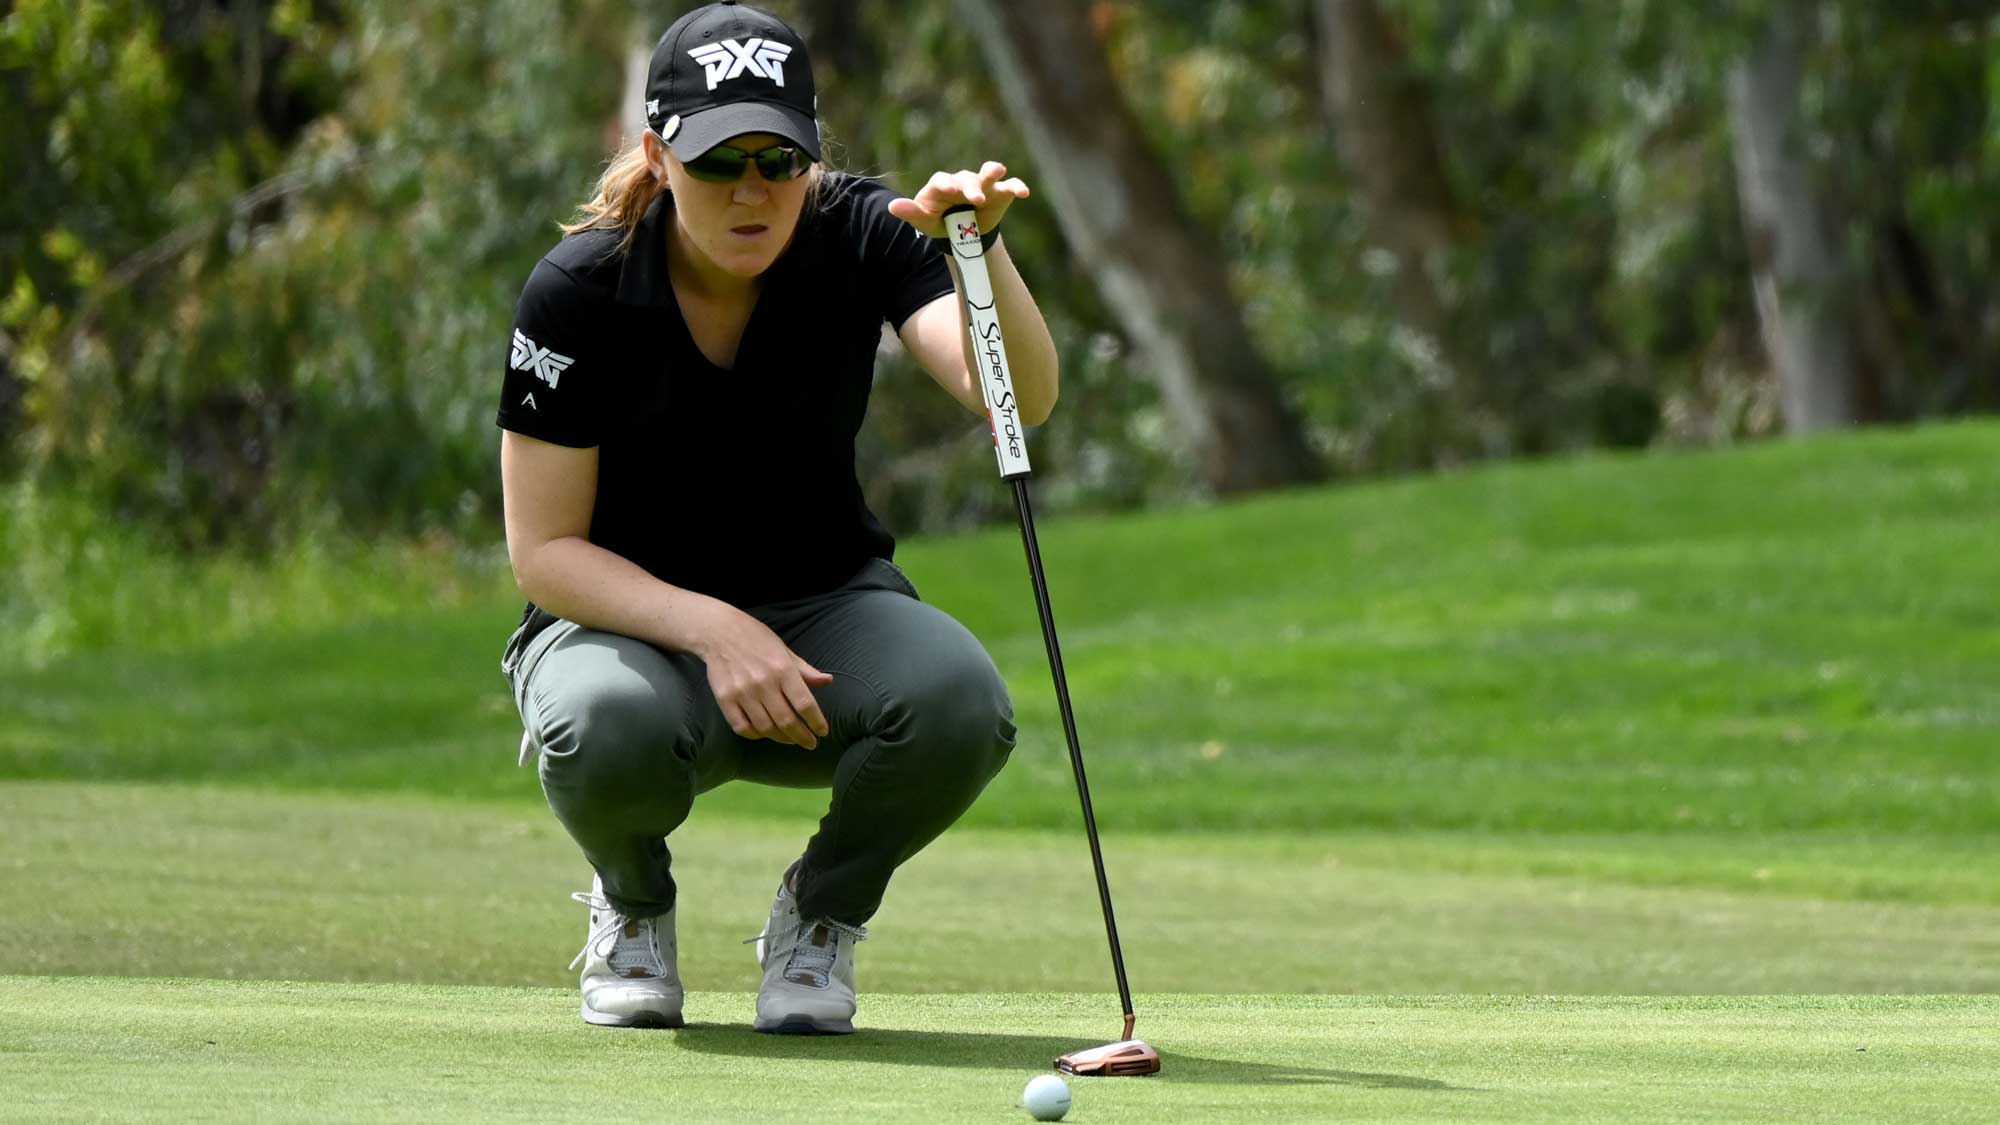 Austin Ernst lines up her putt on the 4th green during the Round Two of the KIA Classic at the Aviara Golf Club on March 26, 2021 in Carlsbad, California.